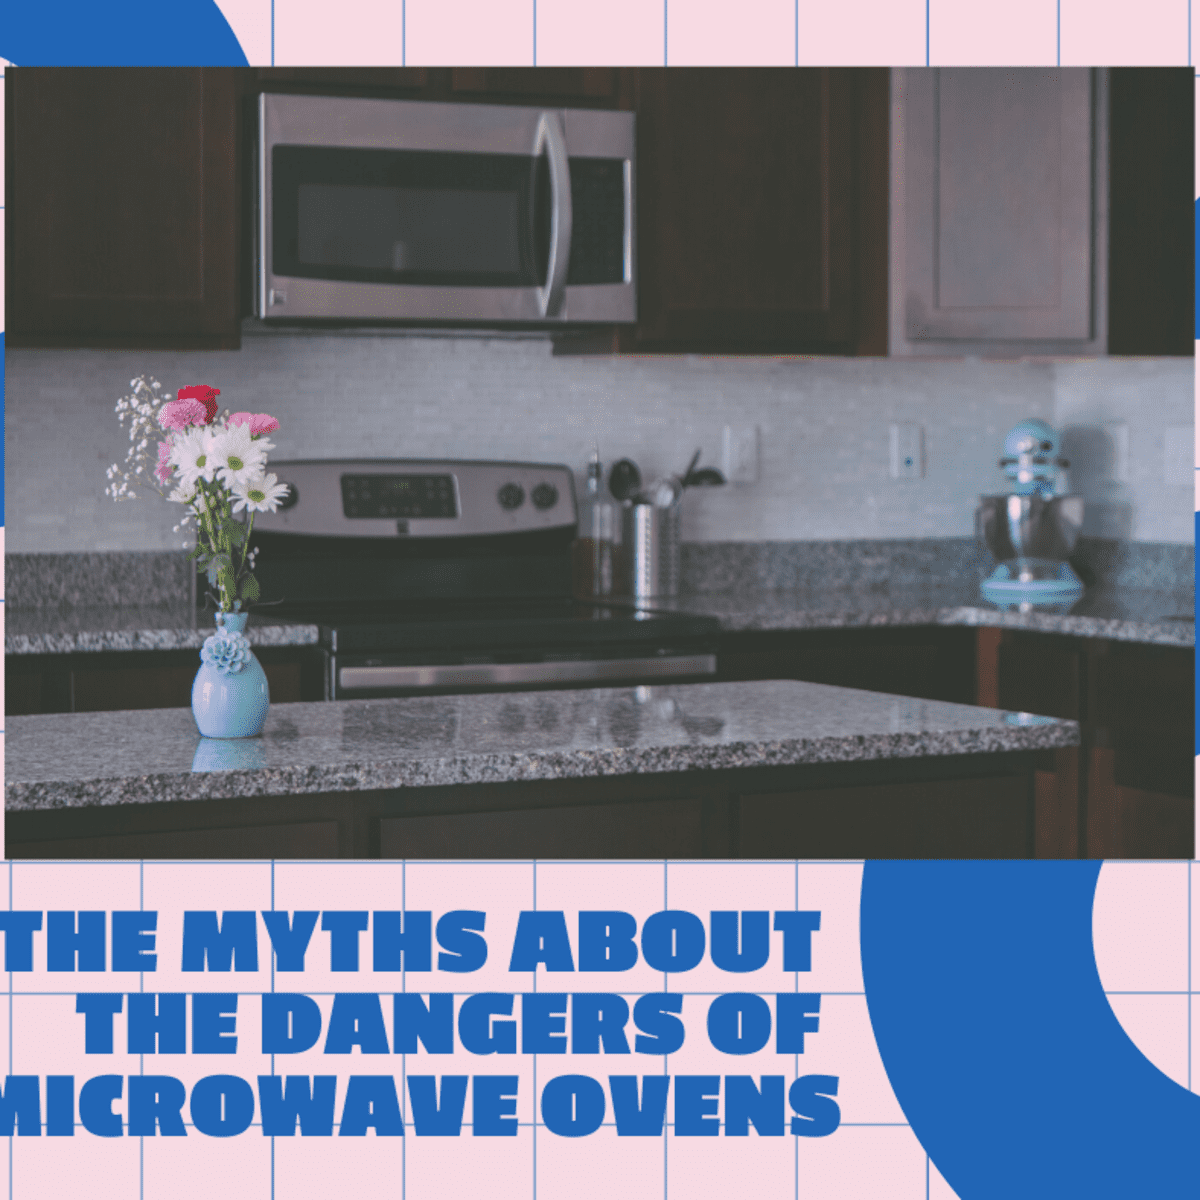 https://images.saymedia-content.com/.image/ar_1:1%2Cc_fill%2Ccs_srgb%2Cq_auto:eco%2Cw_1200/MTczOTIyNDA5ODIzMzQ3Nzc2/the-myths-about-the-dangers-of-microwave-ovens.png